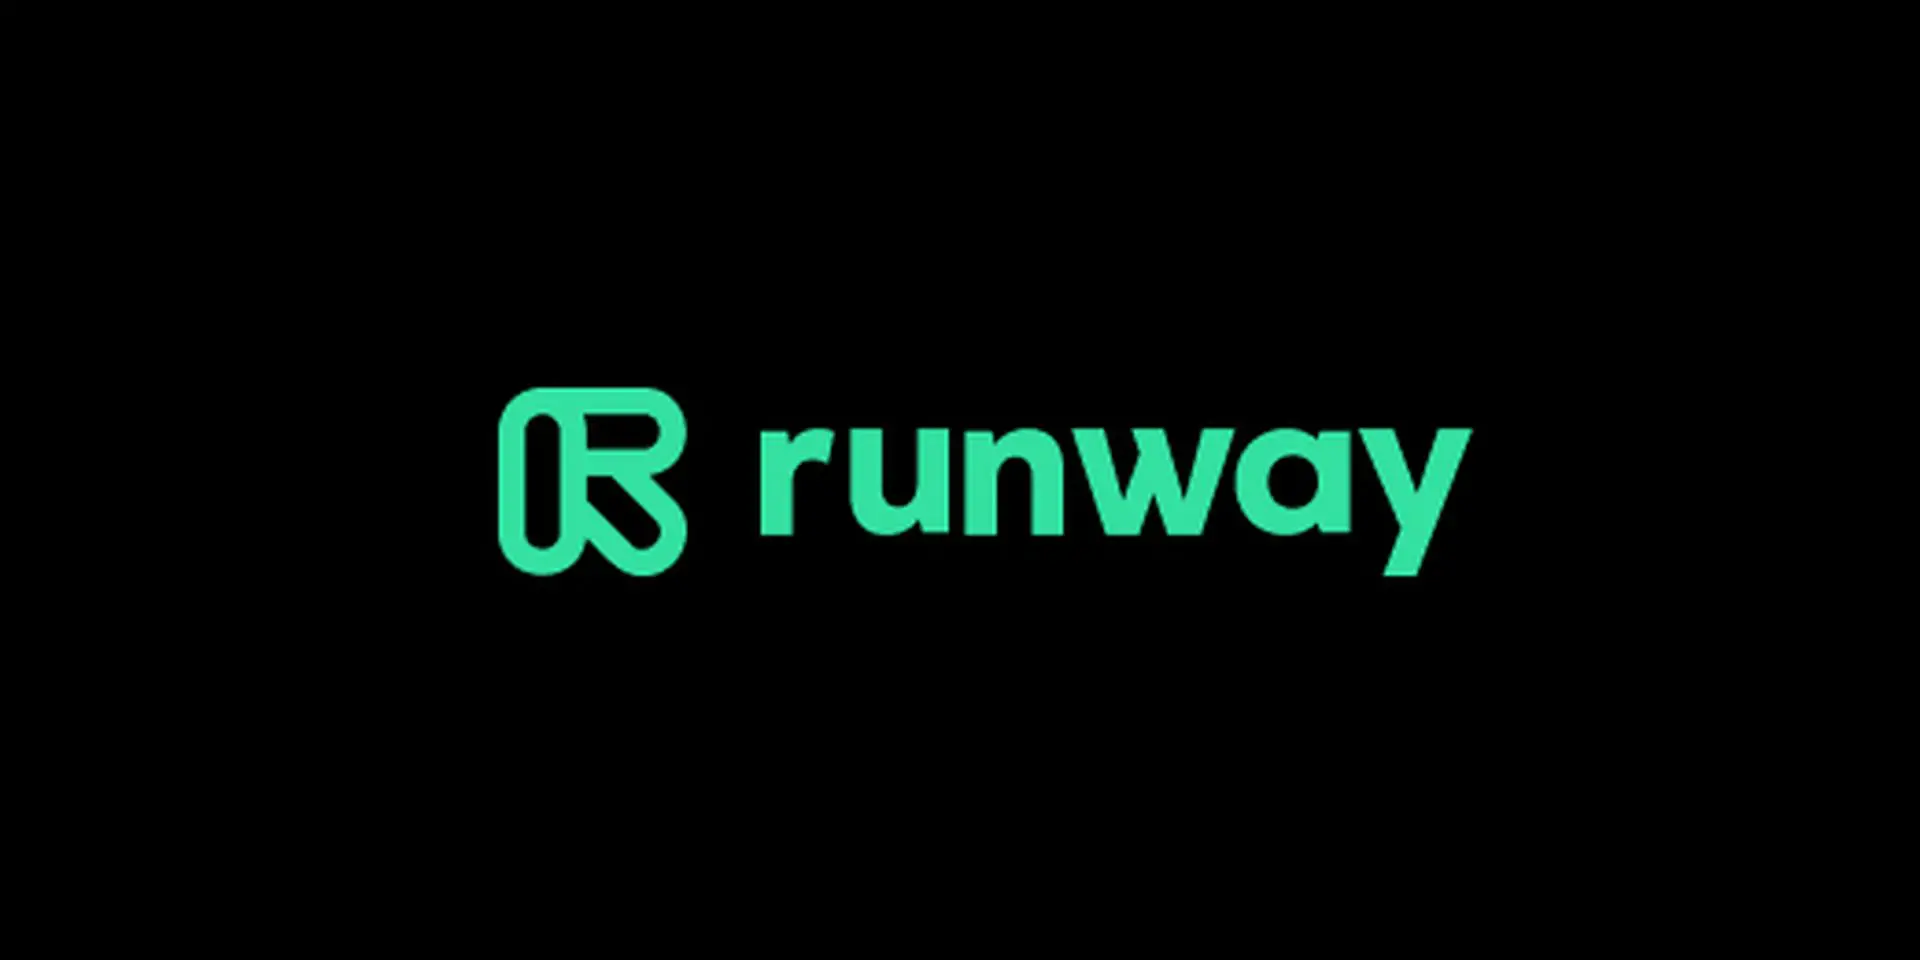 Runway AI Gen-2 makes text-to-video AI generator a reality